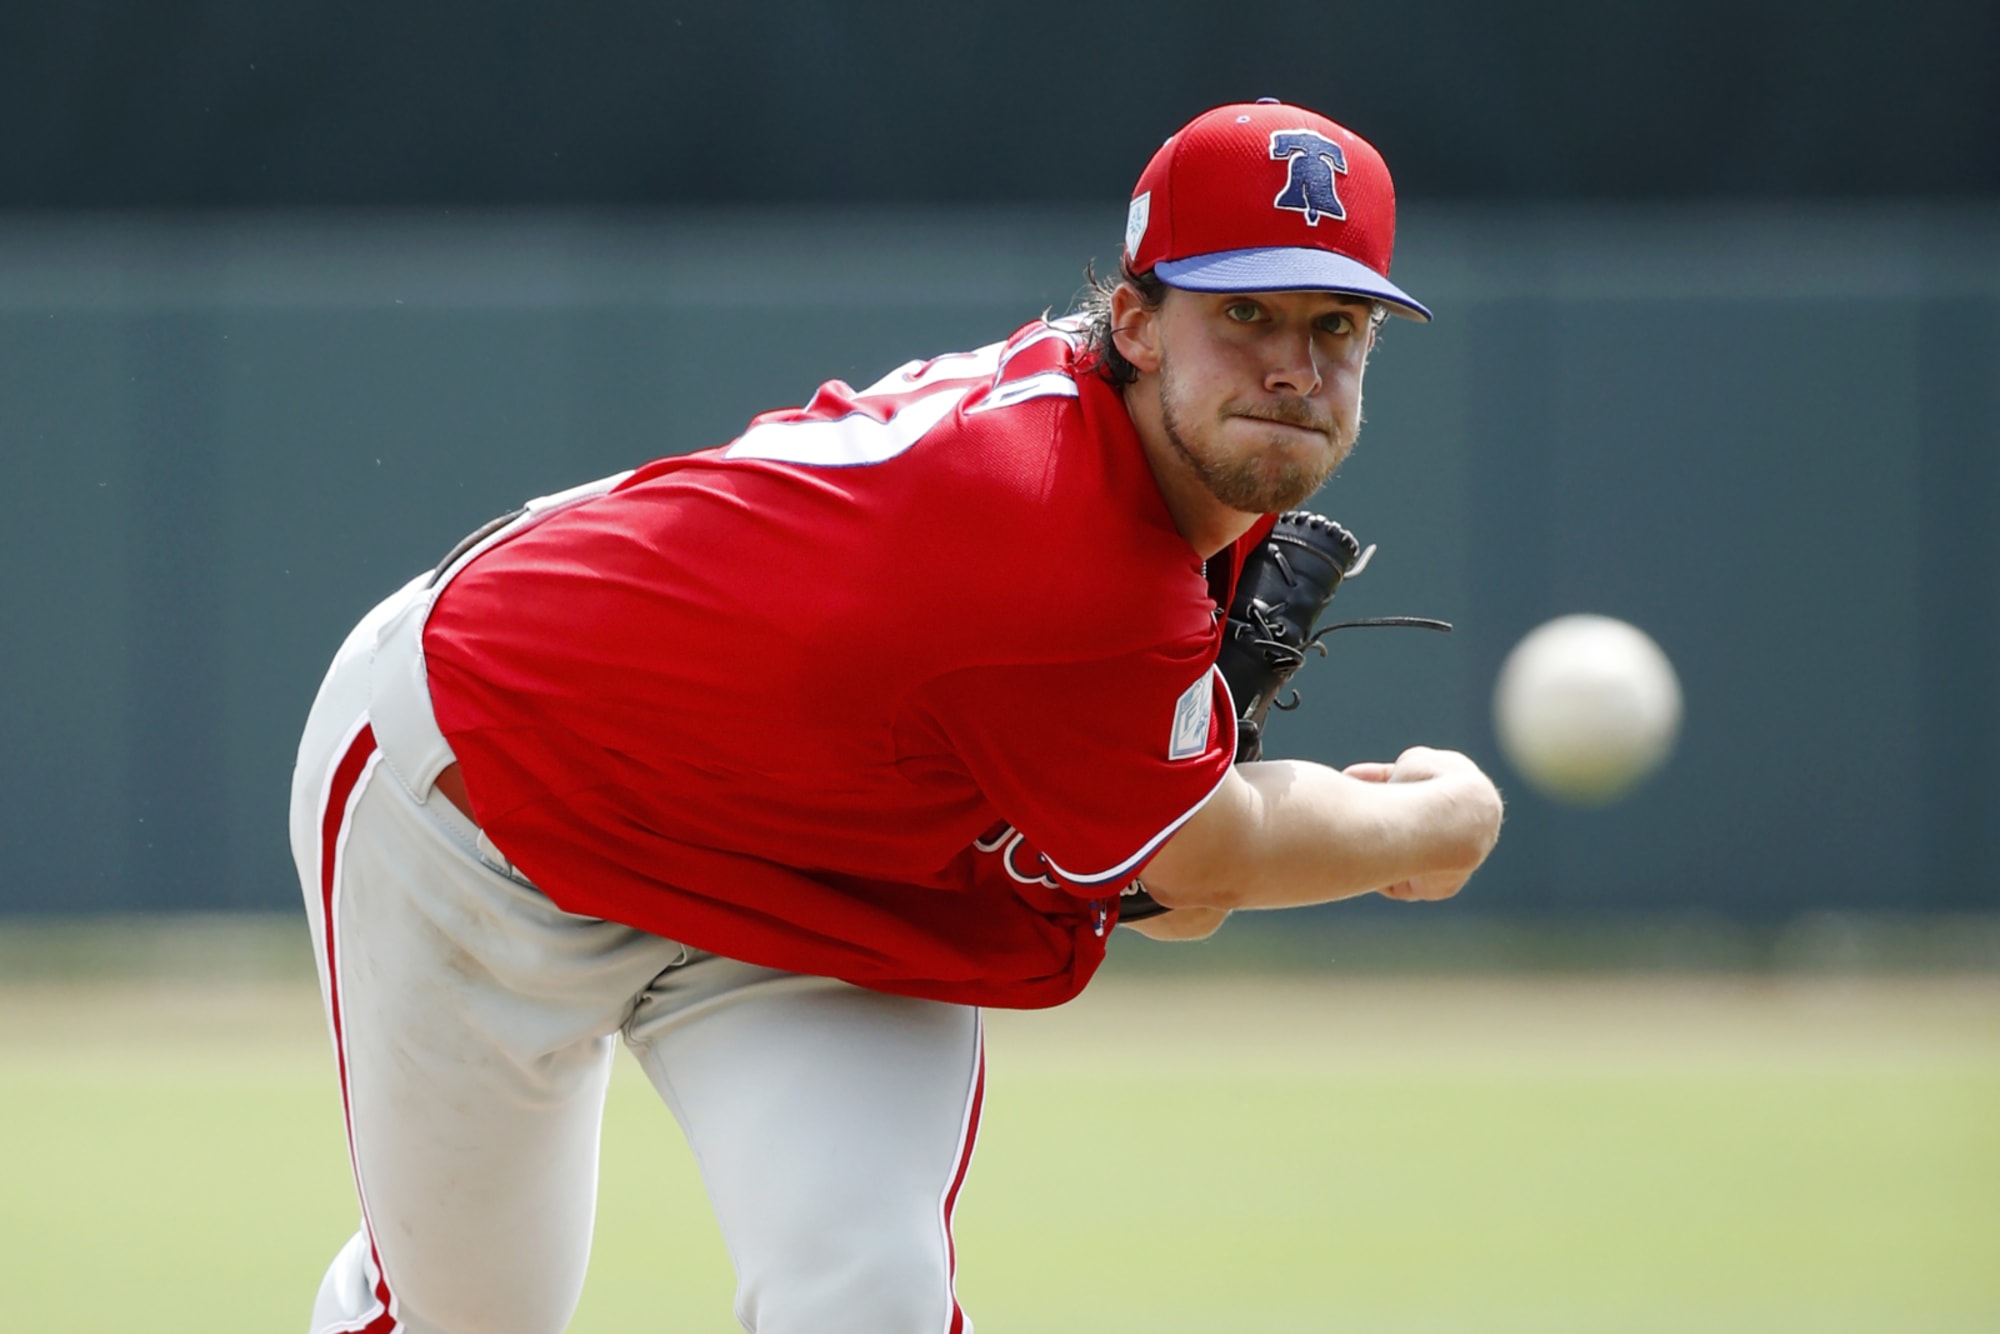 Phillies Pitcher Aaron Nola Signs Partnership Deal With Yuengling -  Yuengling